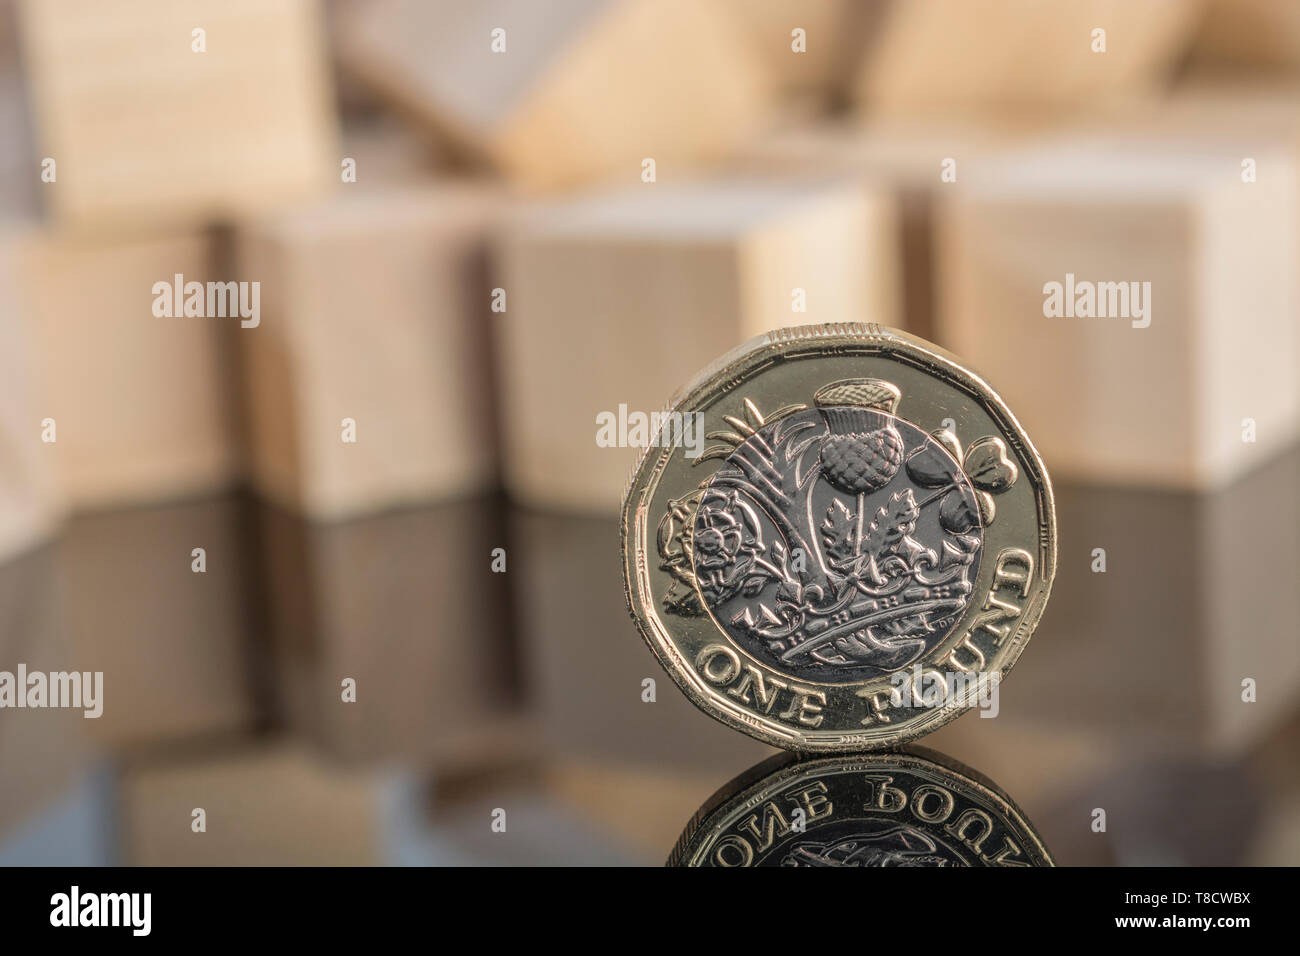 UK New Pound coin on reflective background with scattered wood bricks.For Pound collapse, Sterling collapse, fall in Pound value, UK banking crash. Stock Photo